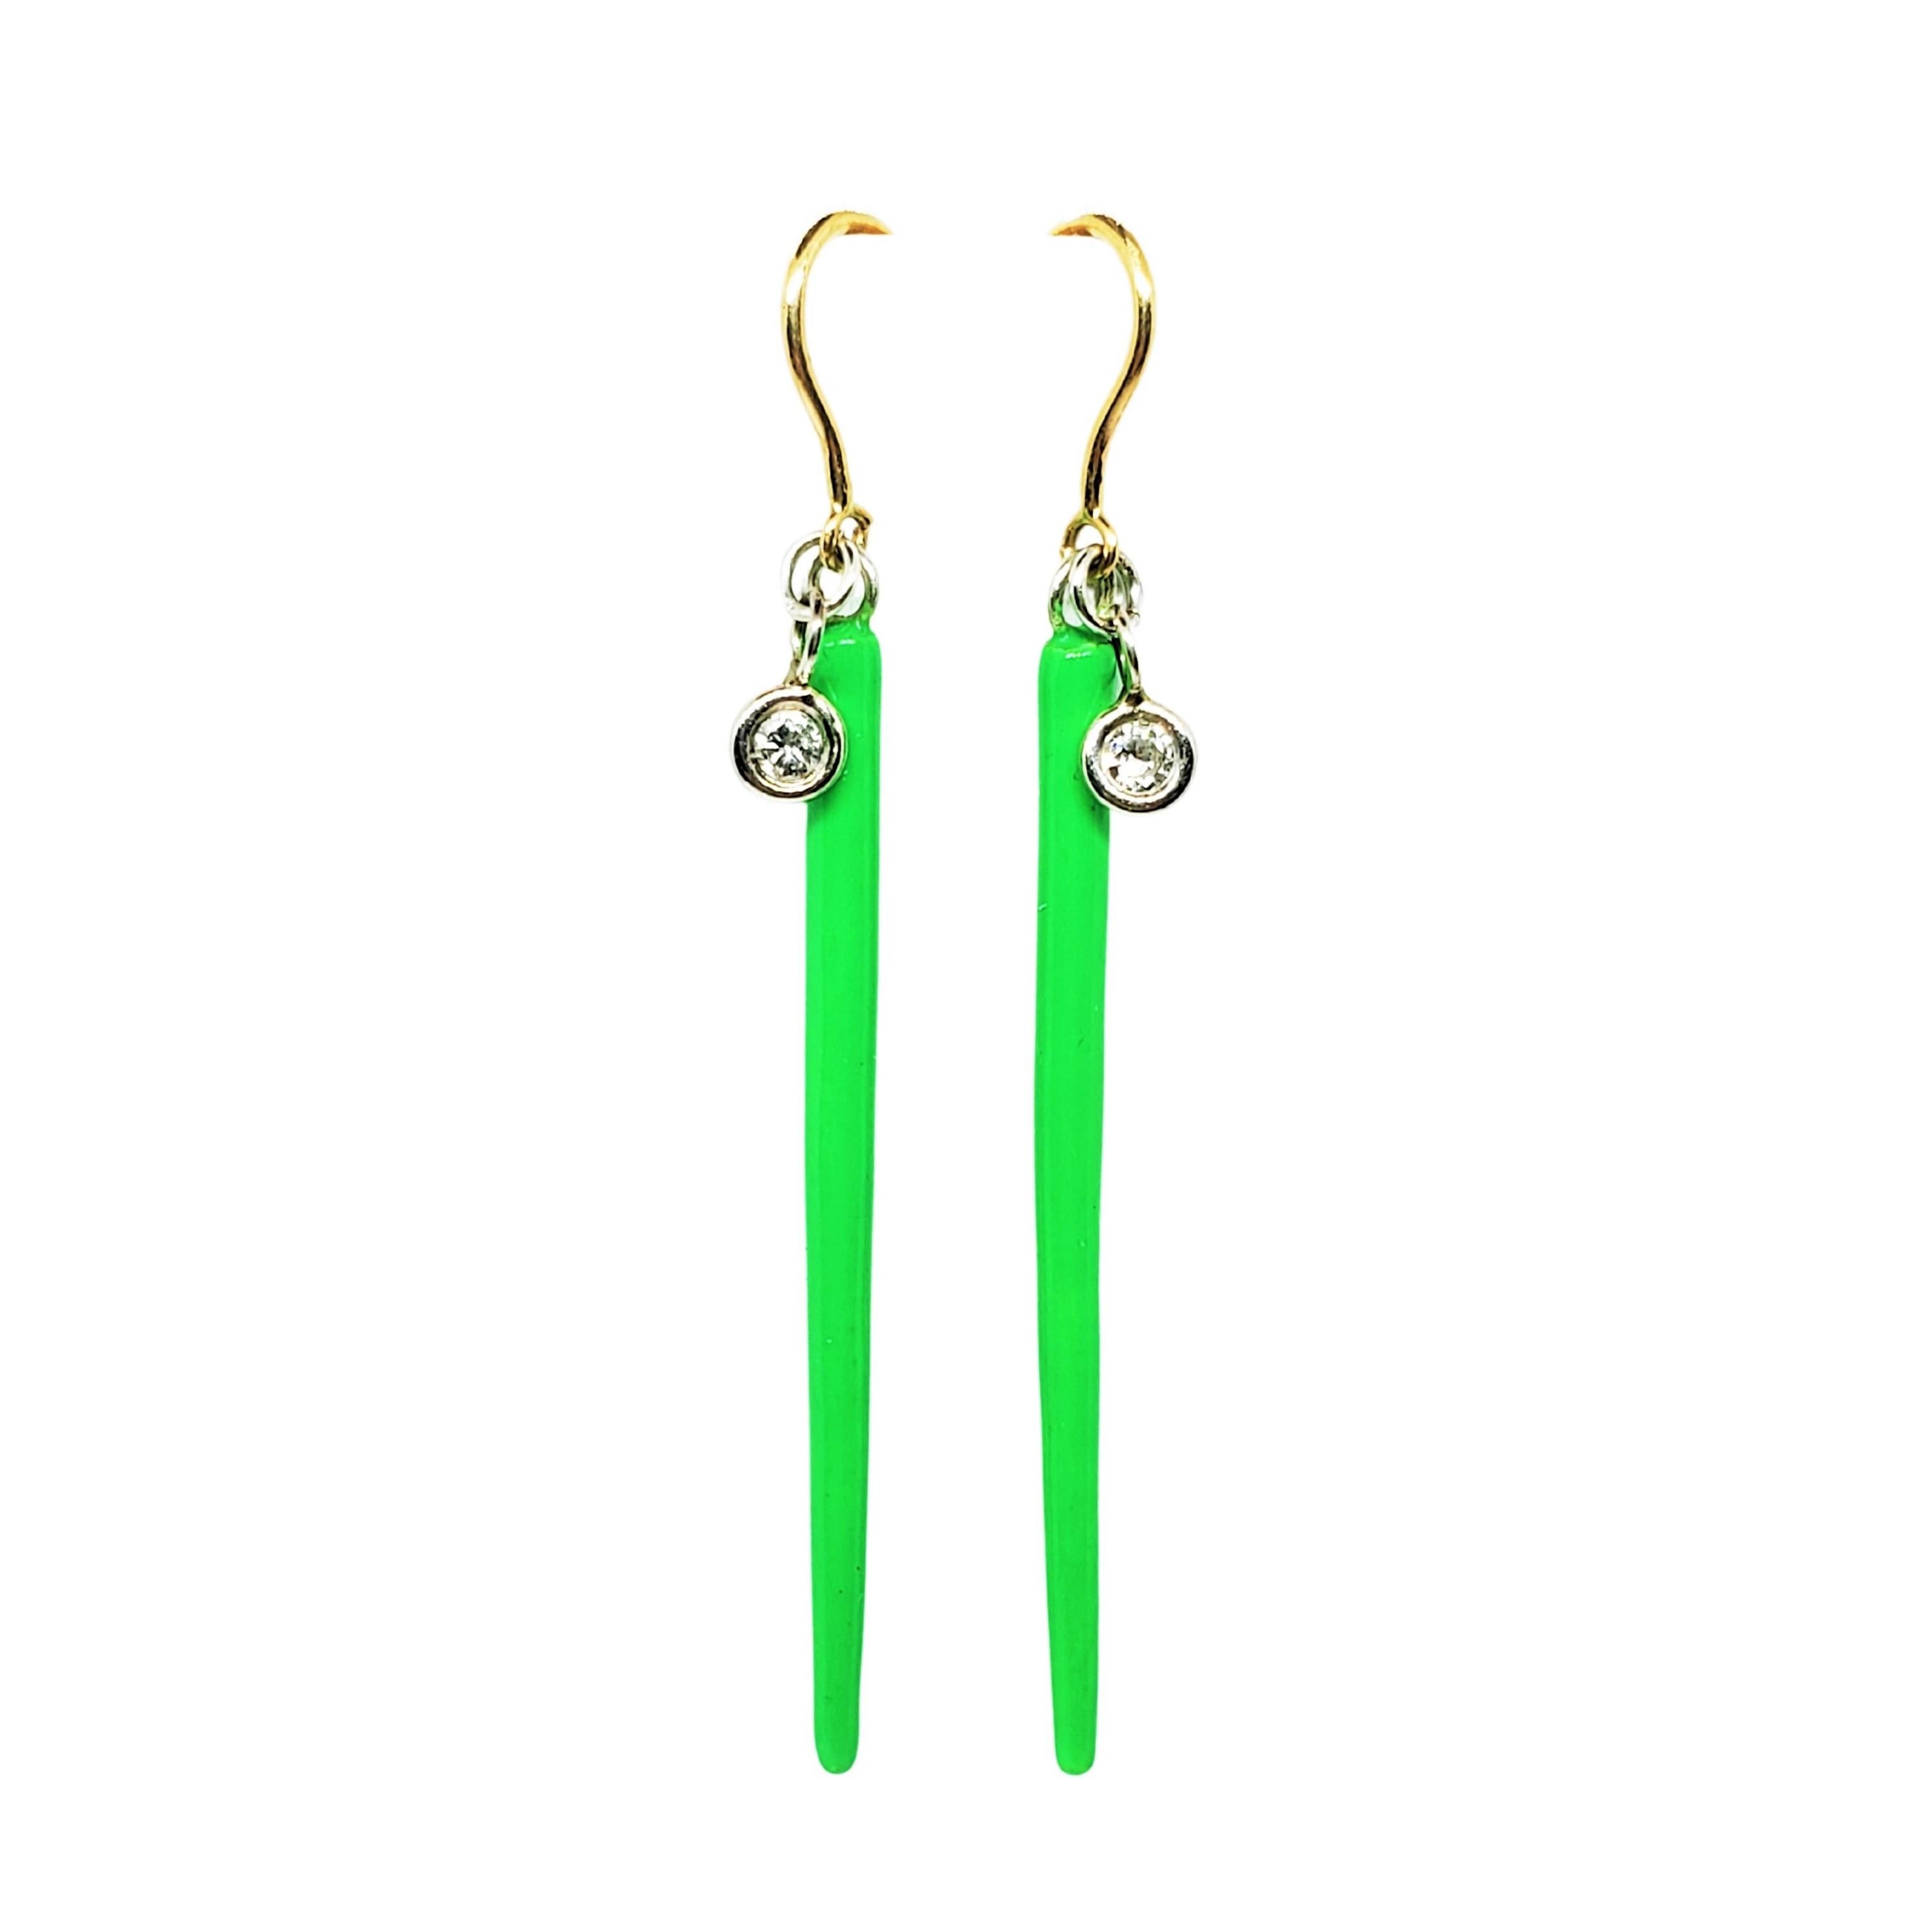 Neon Enamel Spike Earrings with Diamond Dangle in Sterling Silver on Eurowire In New Condition For Sale In Rutherford, NJ